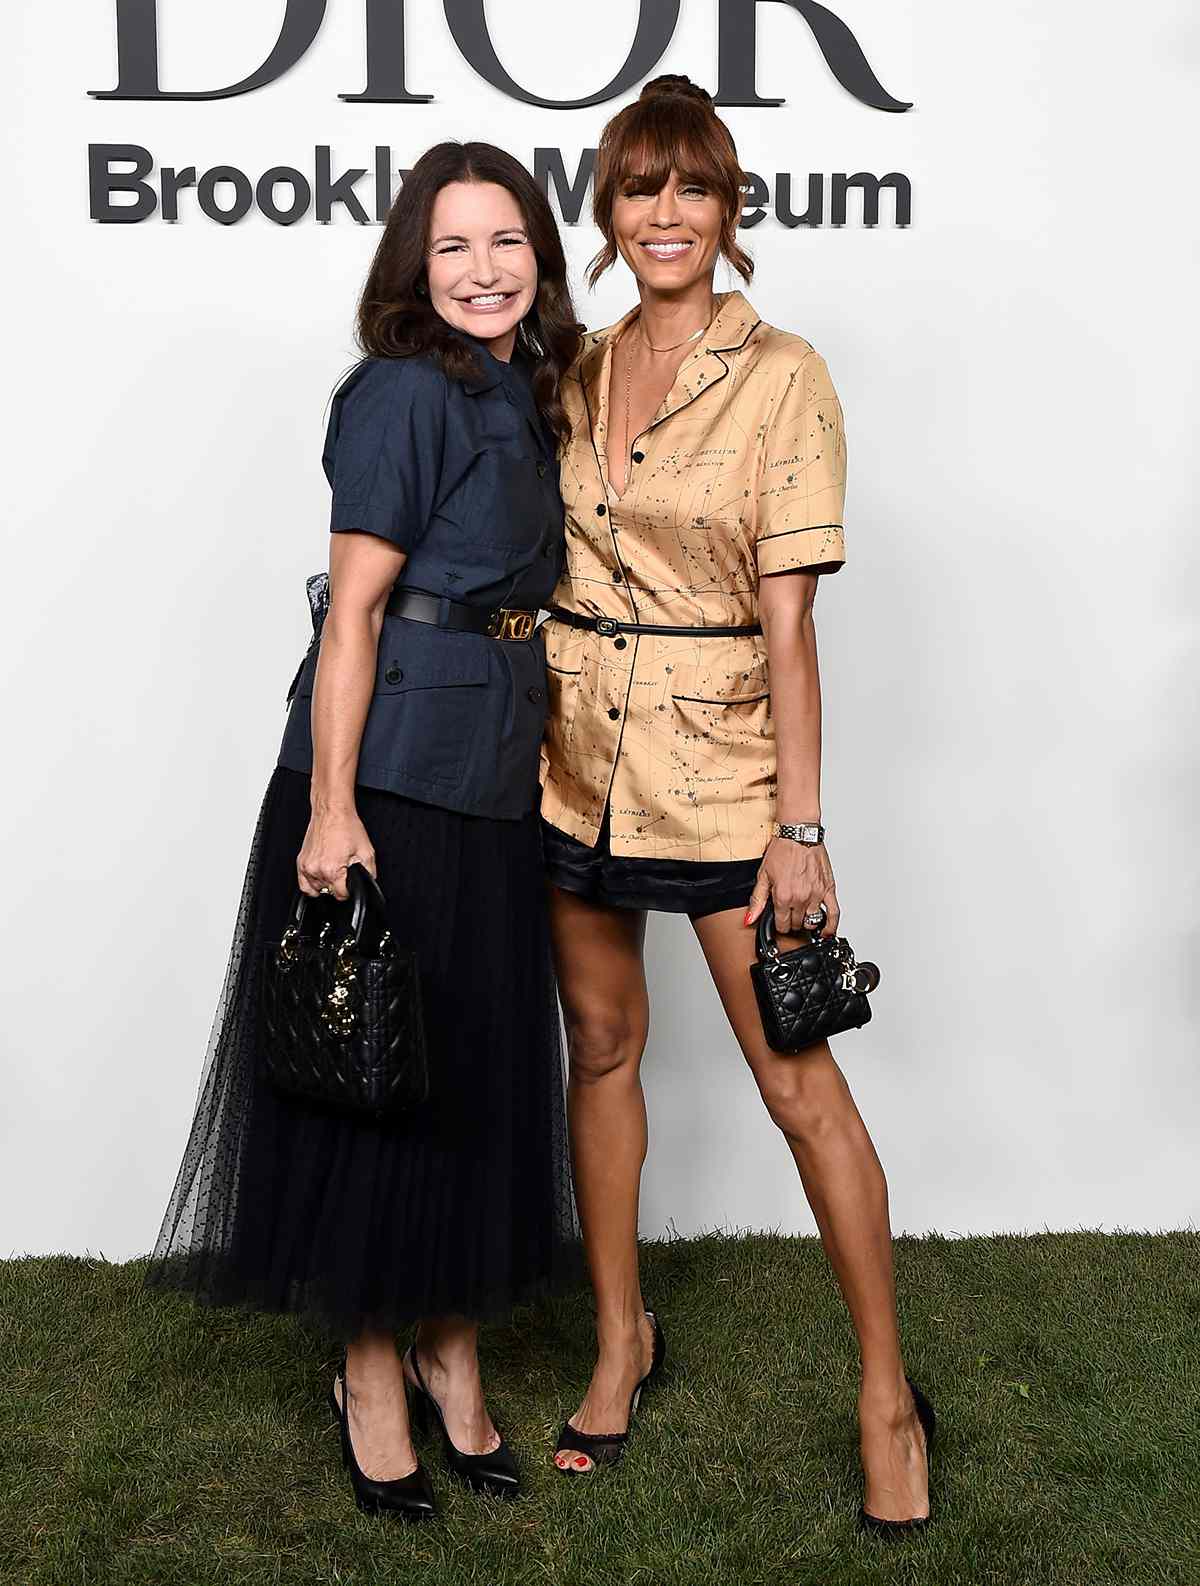 Kristin Davis and Nicole Ari Parker attend the Christian Dior Designer of Dreams Exhibition cocktail opening at the Brooklyn Museum on September 08, 2021